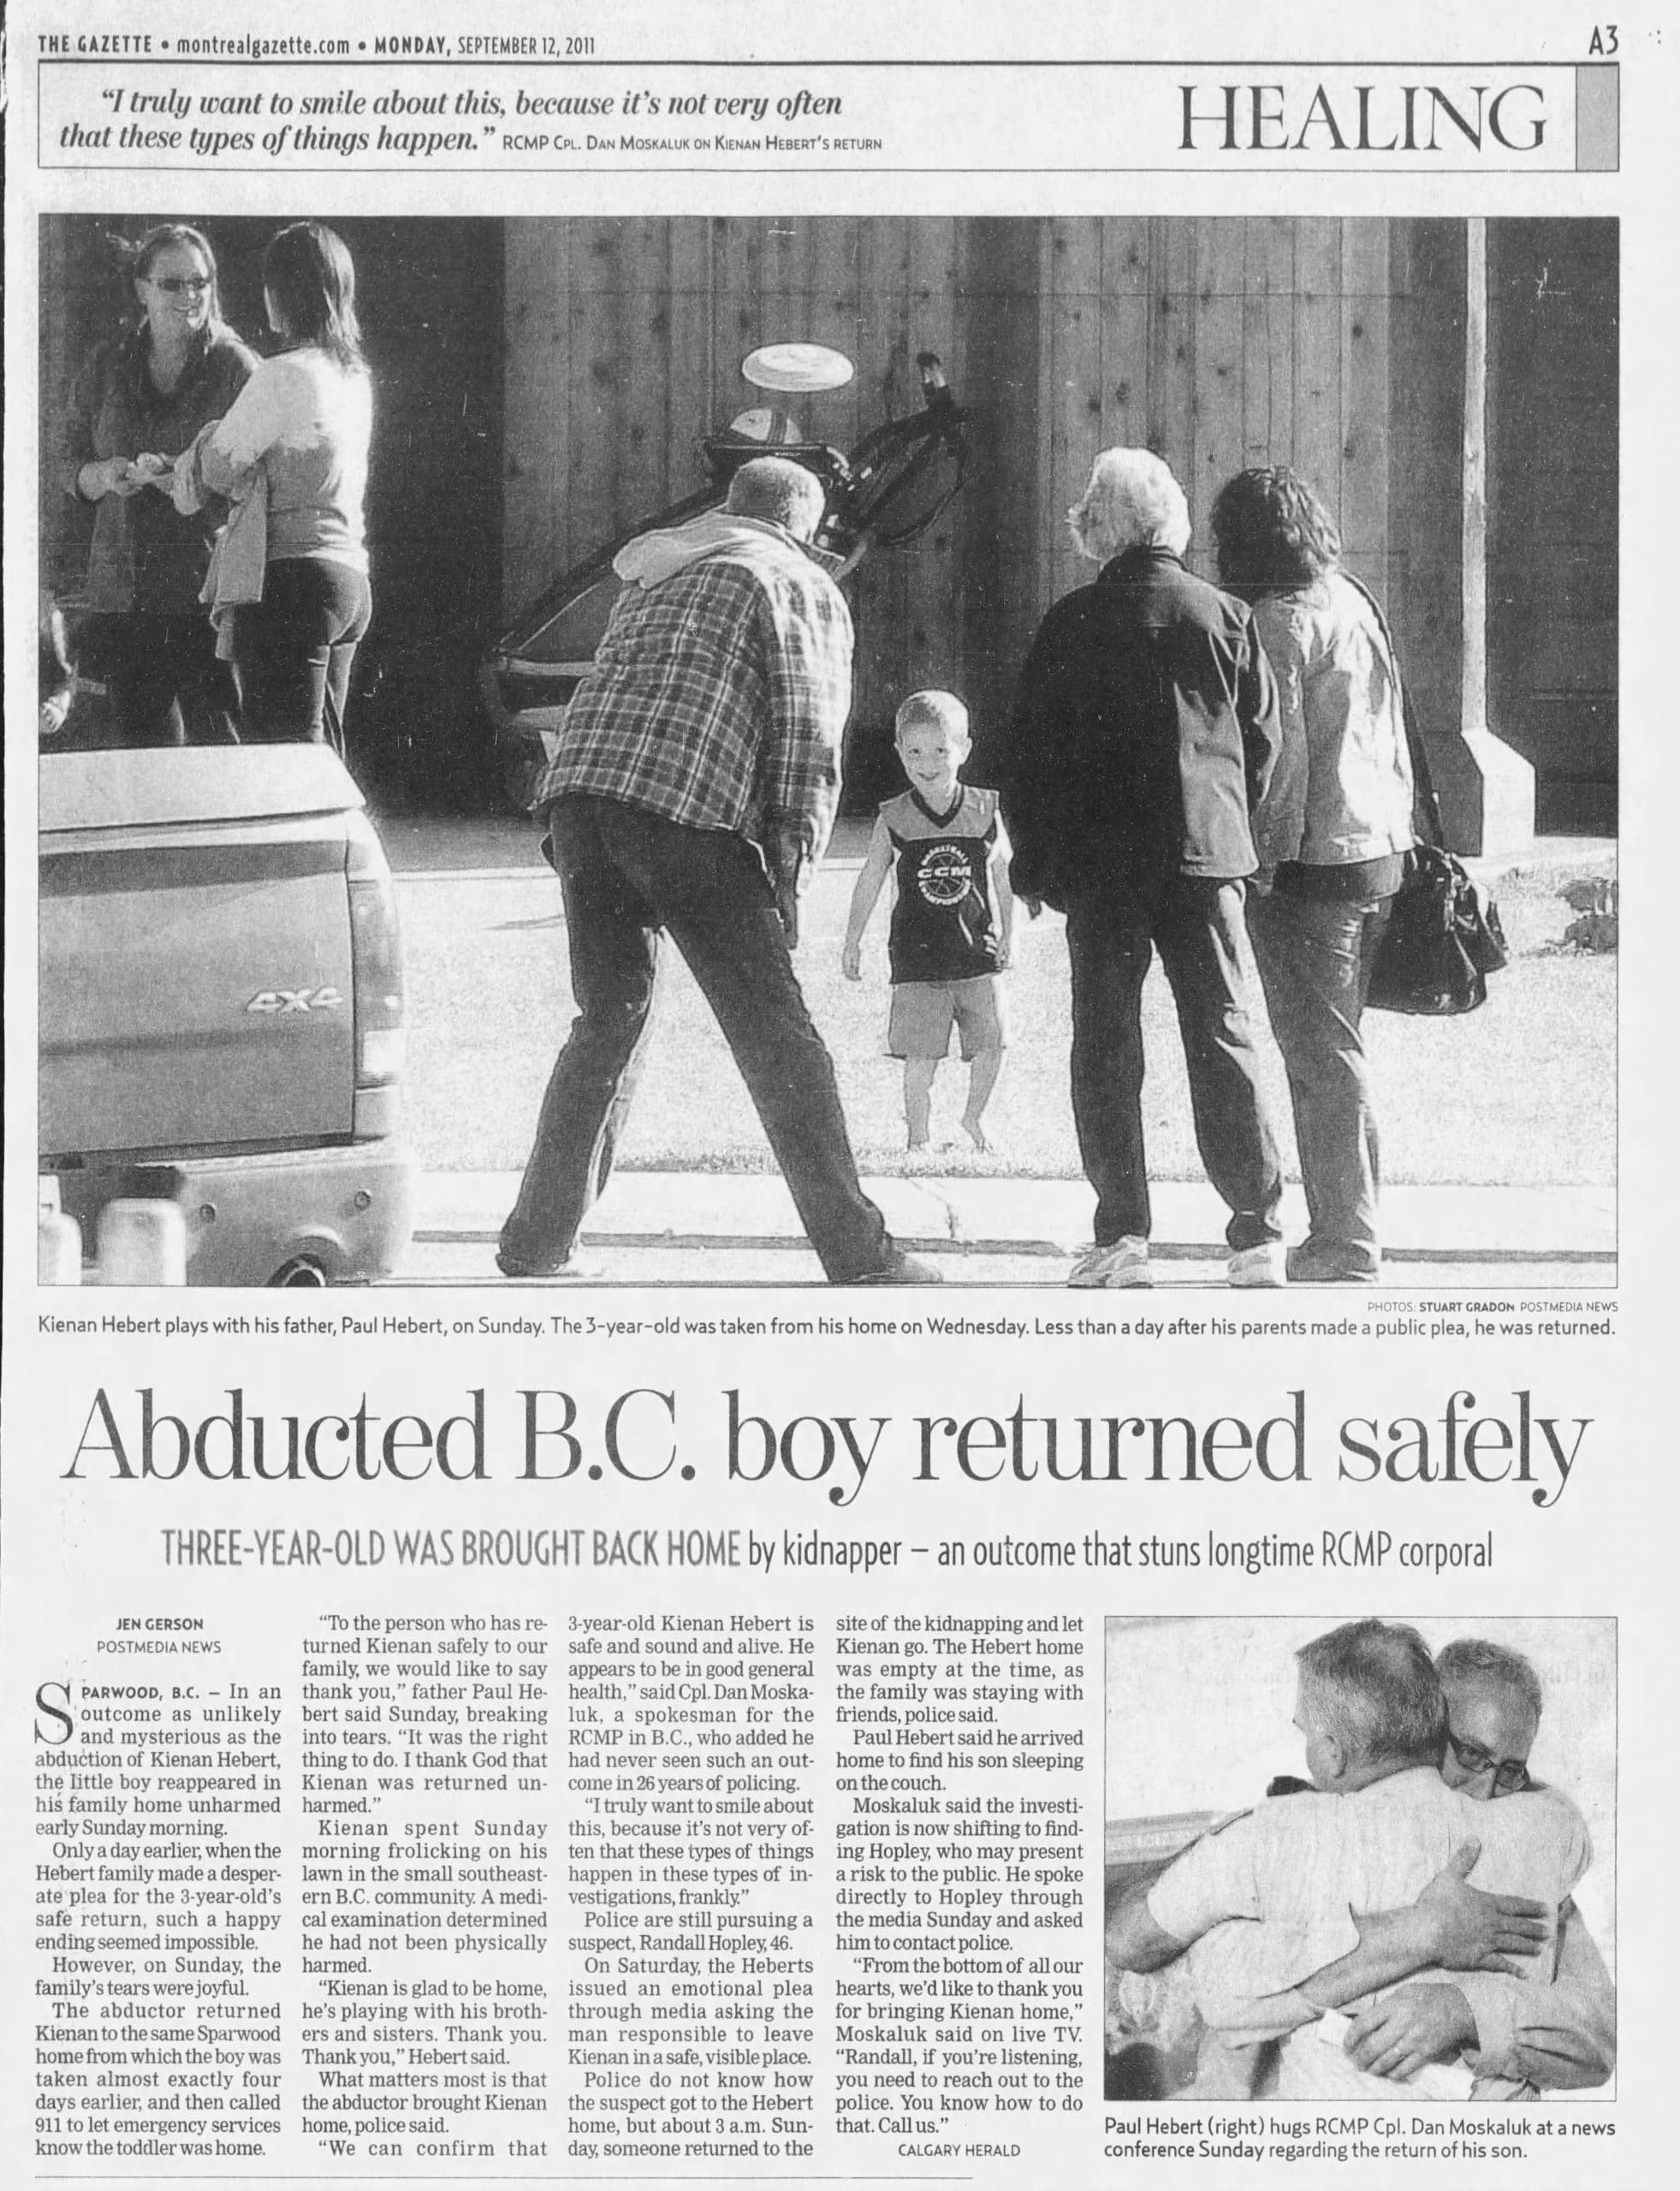 A newspaper clipping from the day Kienan Hebert returned home after being abducted in B.C.